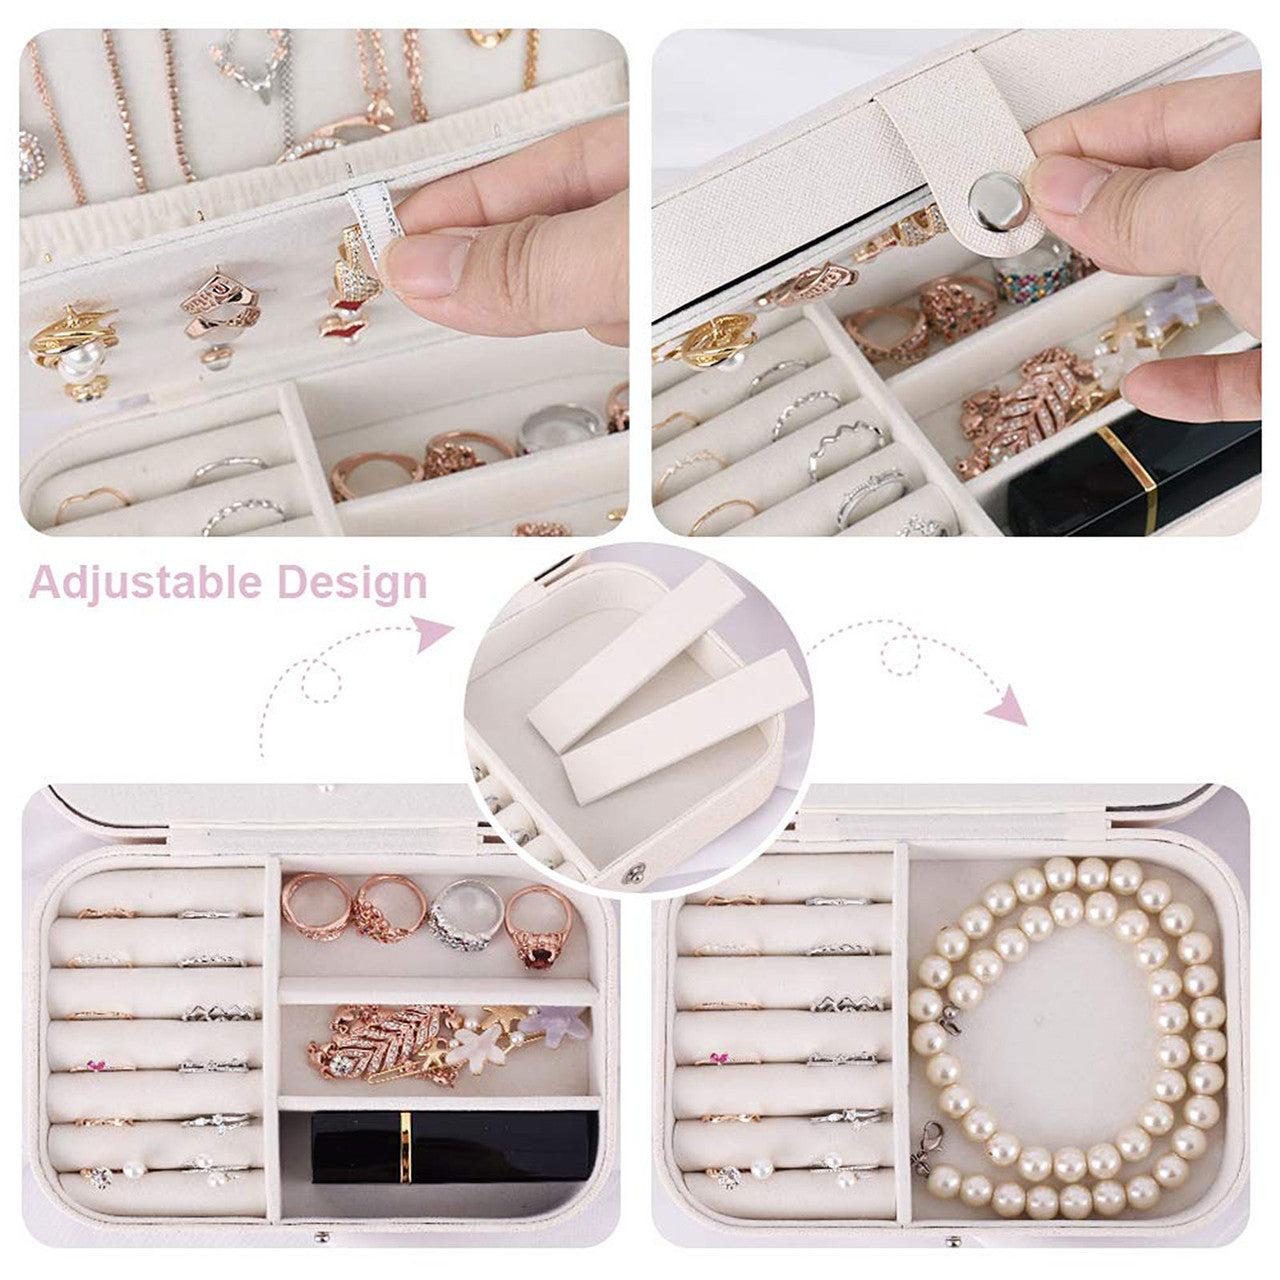 Jewelry Box for Women, Double Layers PU Leather Travel Jewelry Organizer Display Case for Necklace Earring Rings Storage, Sparkle Jewelry Holder Case, White